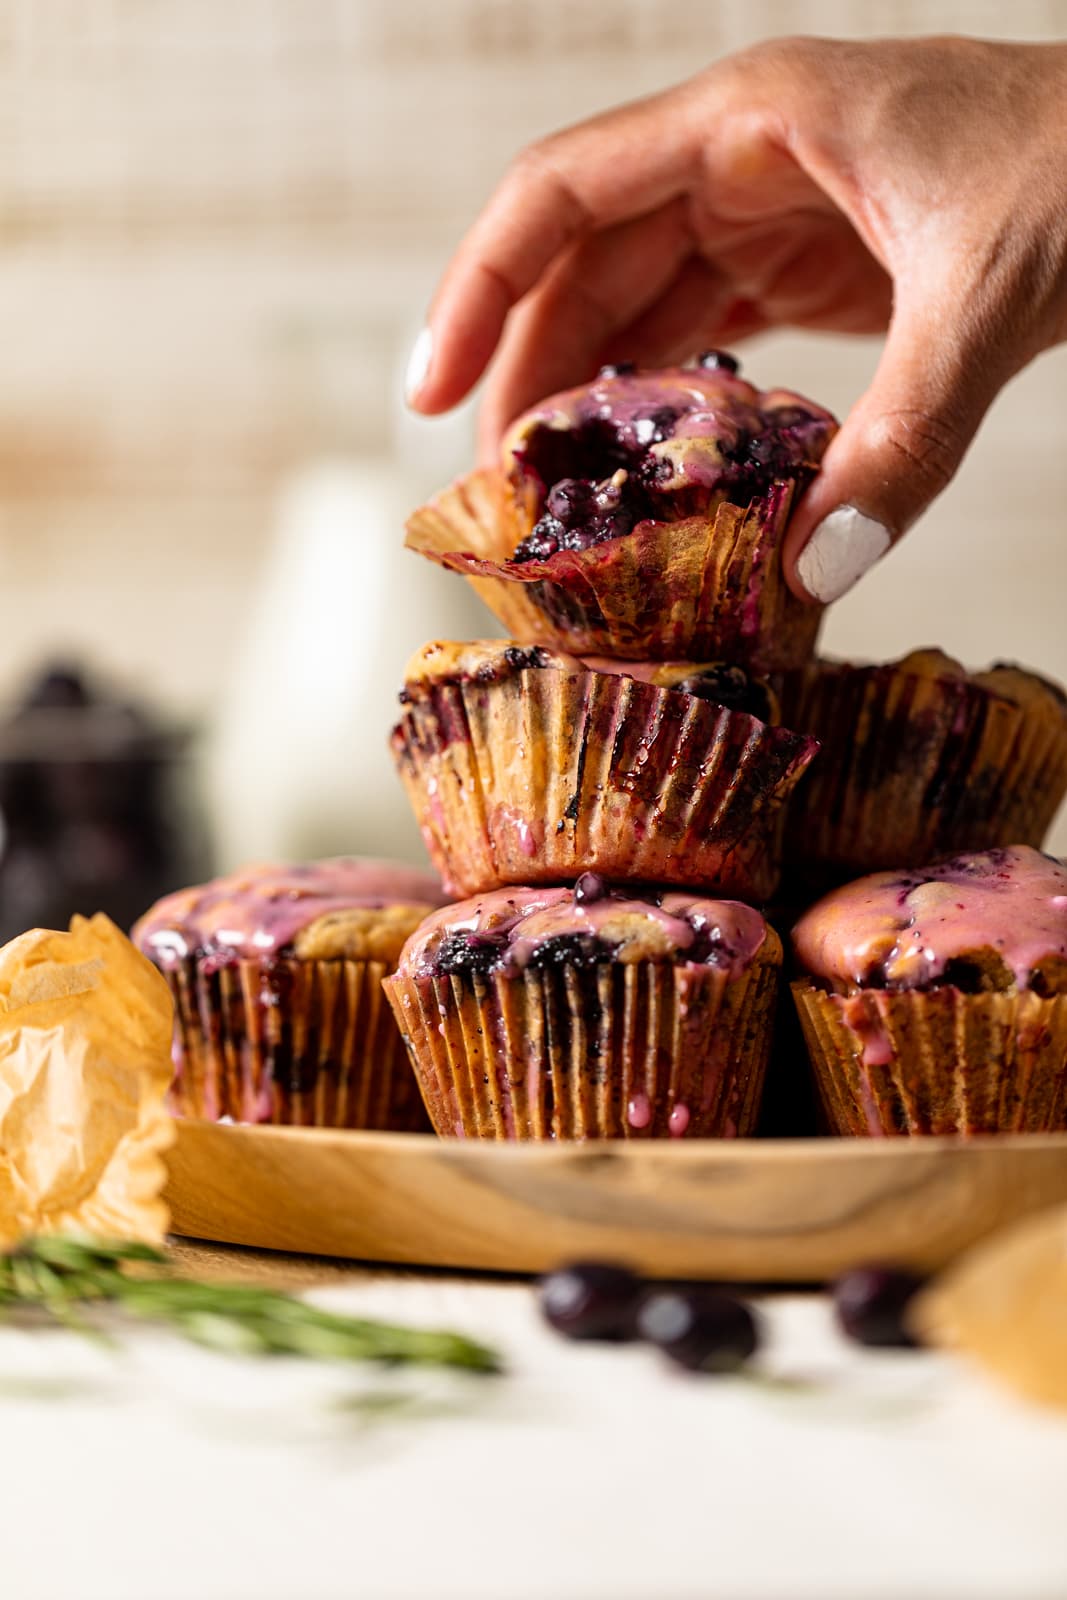 Hand grabbing a Blueberry Blackberry Jam Muffin from a pile